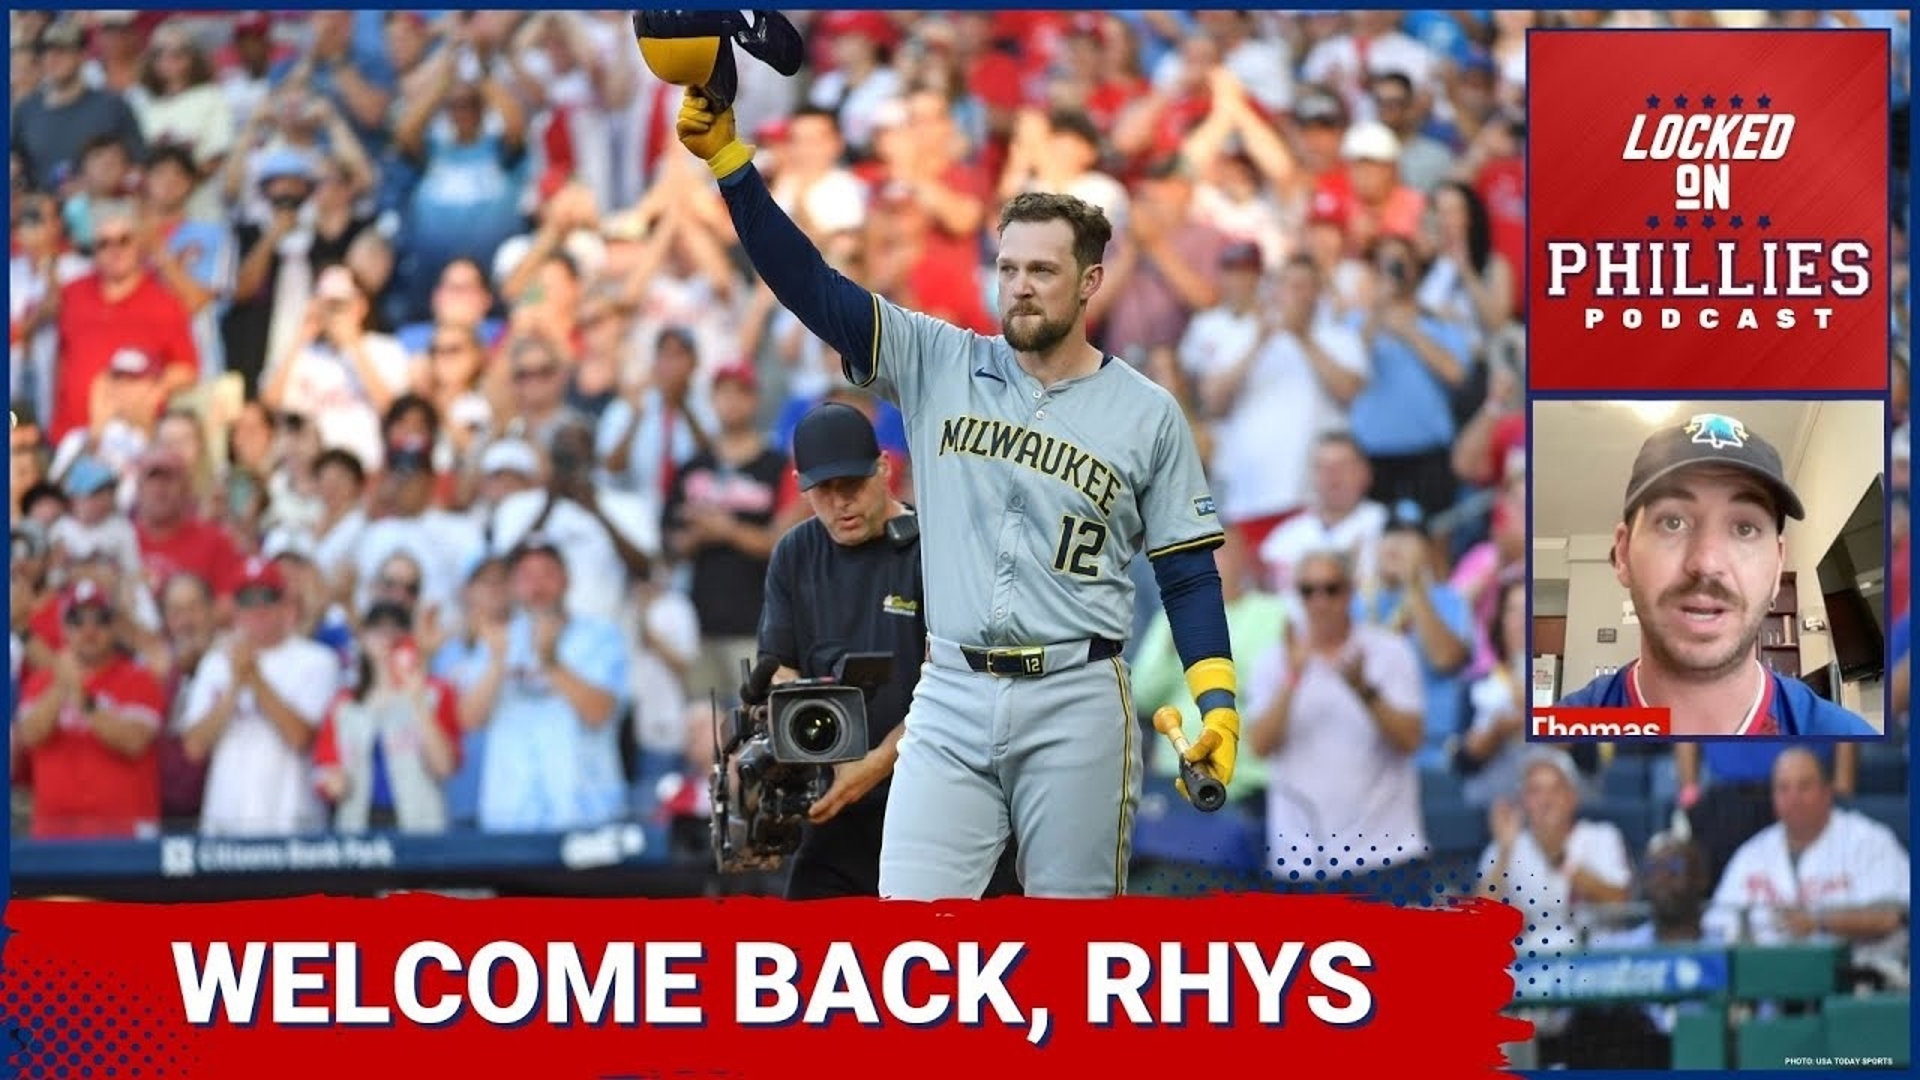 In today's episode, Connor reacts to a beautiful night at Citizens Bank Park as the Philadelphia Phillies welcomed the Milwaukee Brewers and old friend Rhys Hoskins.